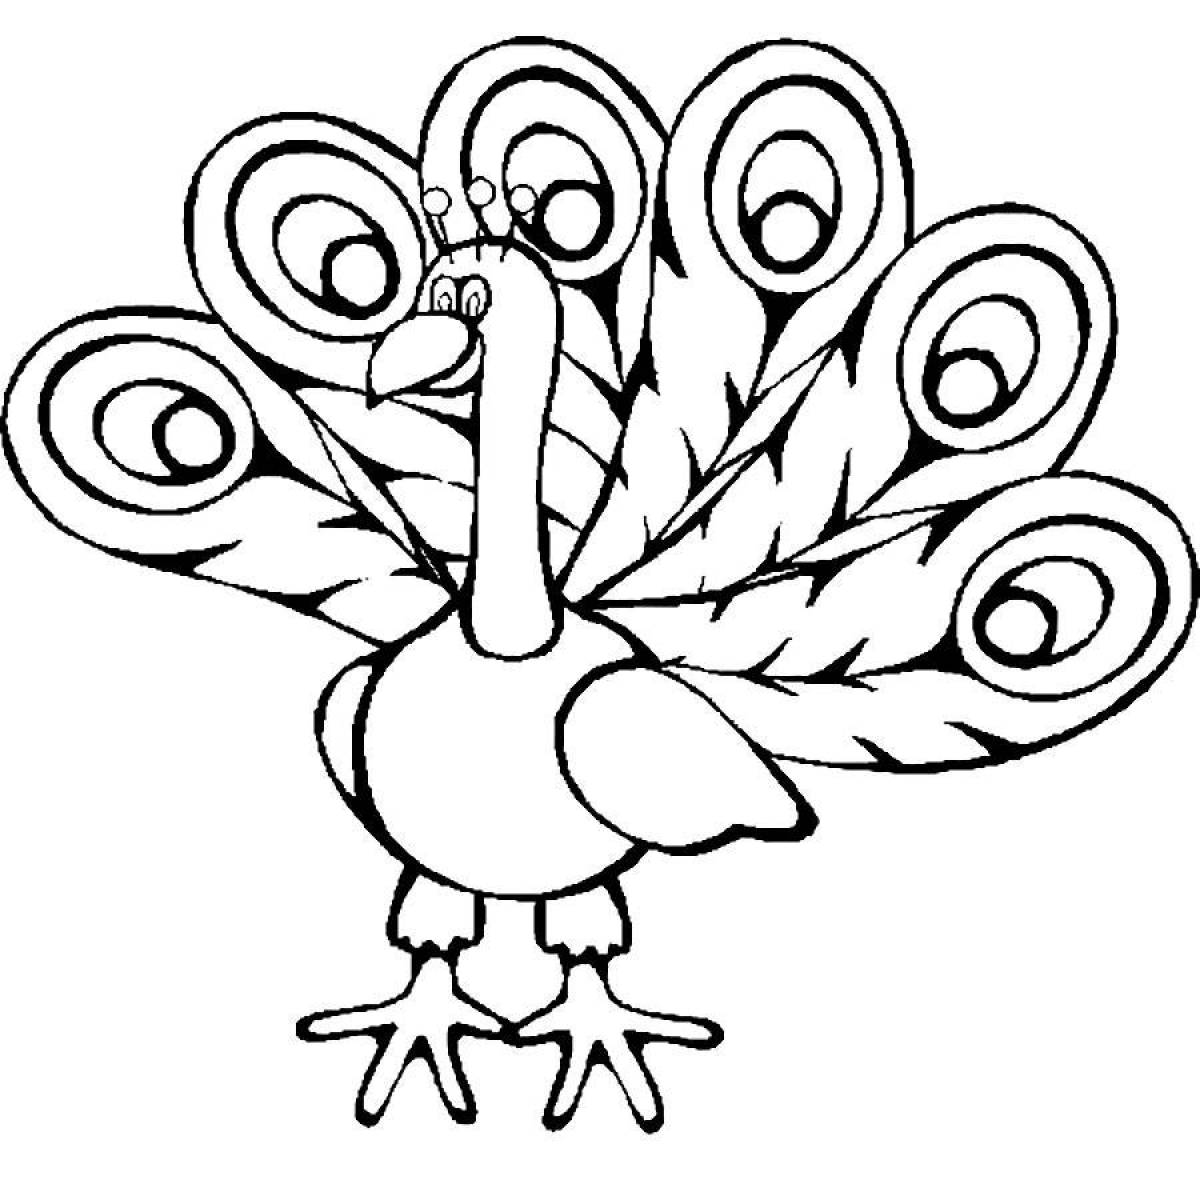 Animated peacock coloring page for kids